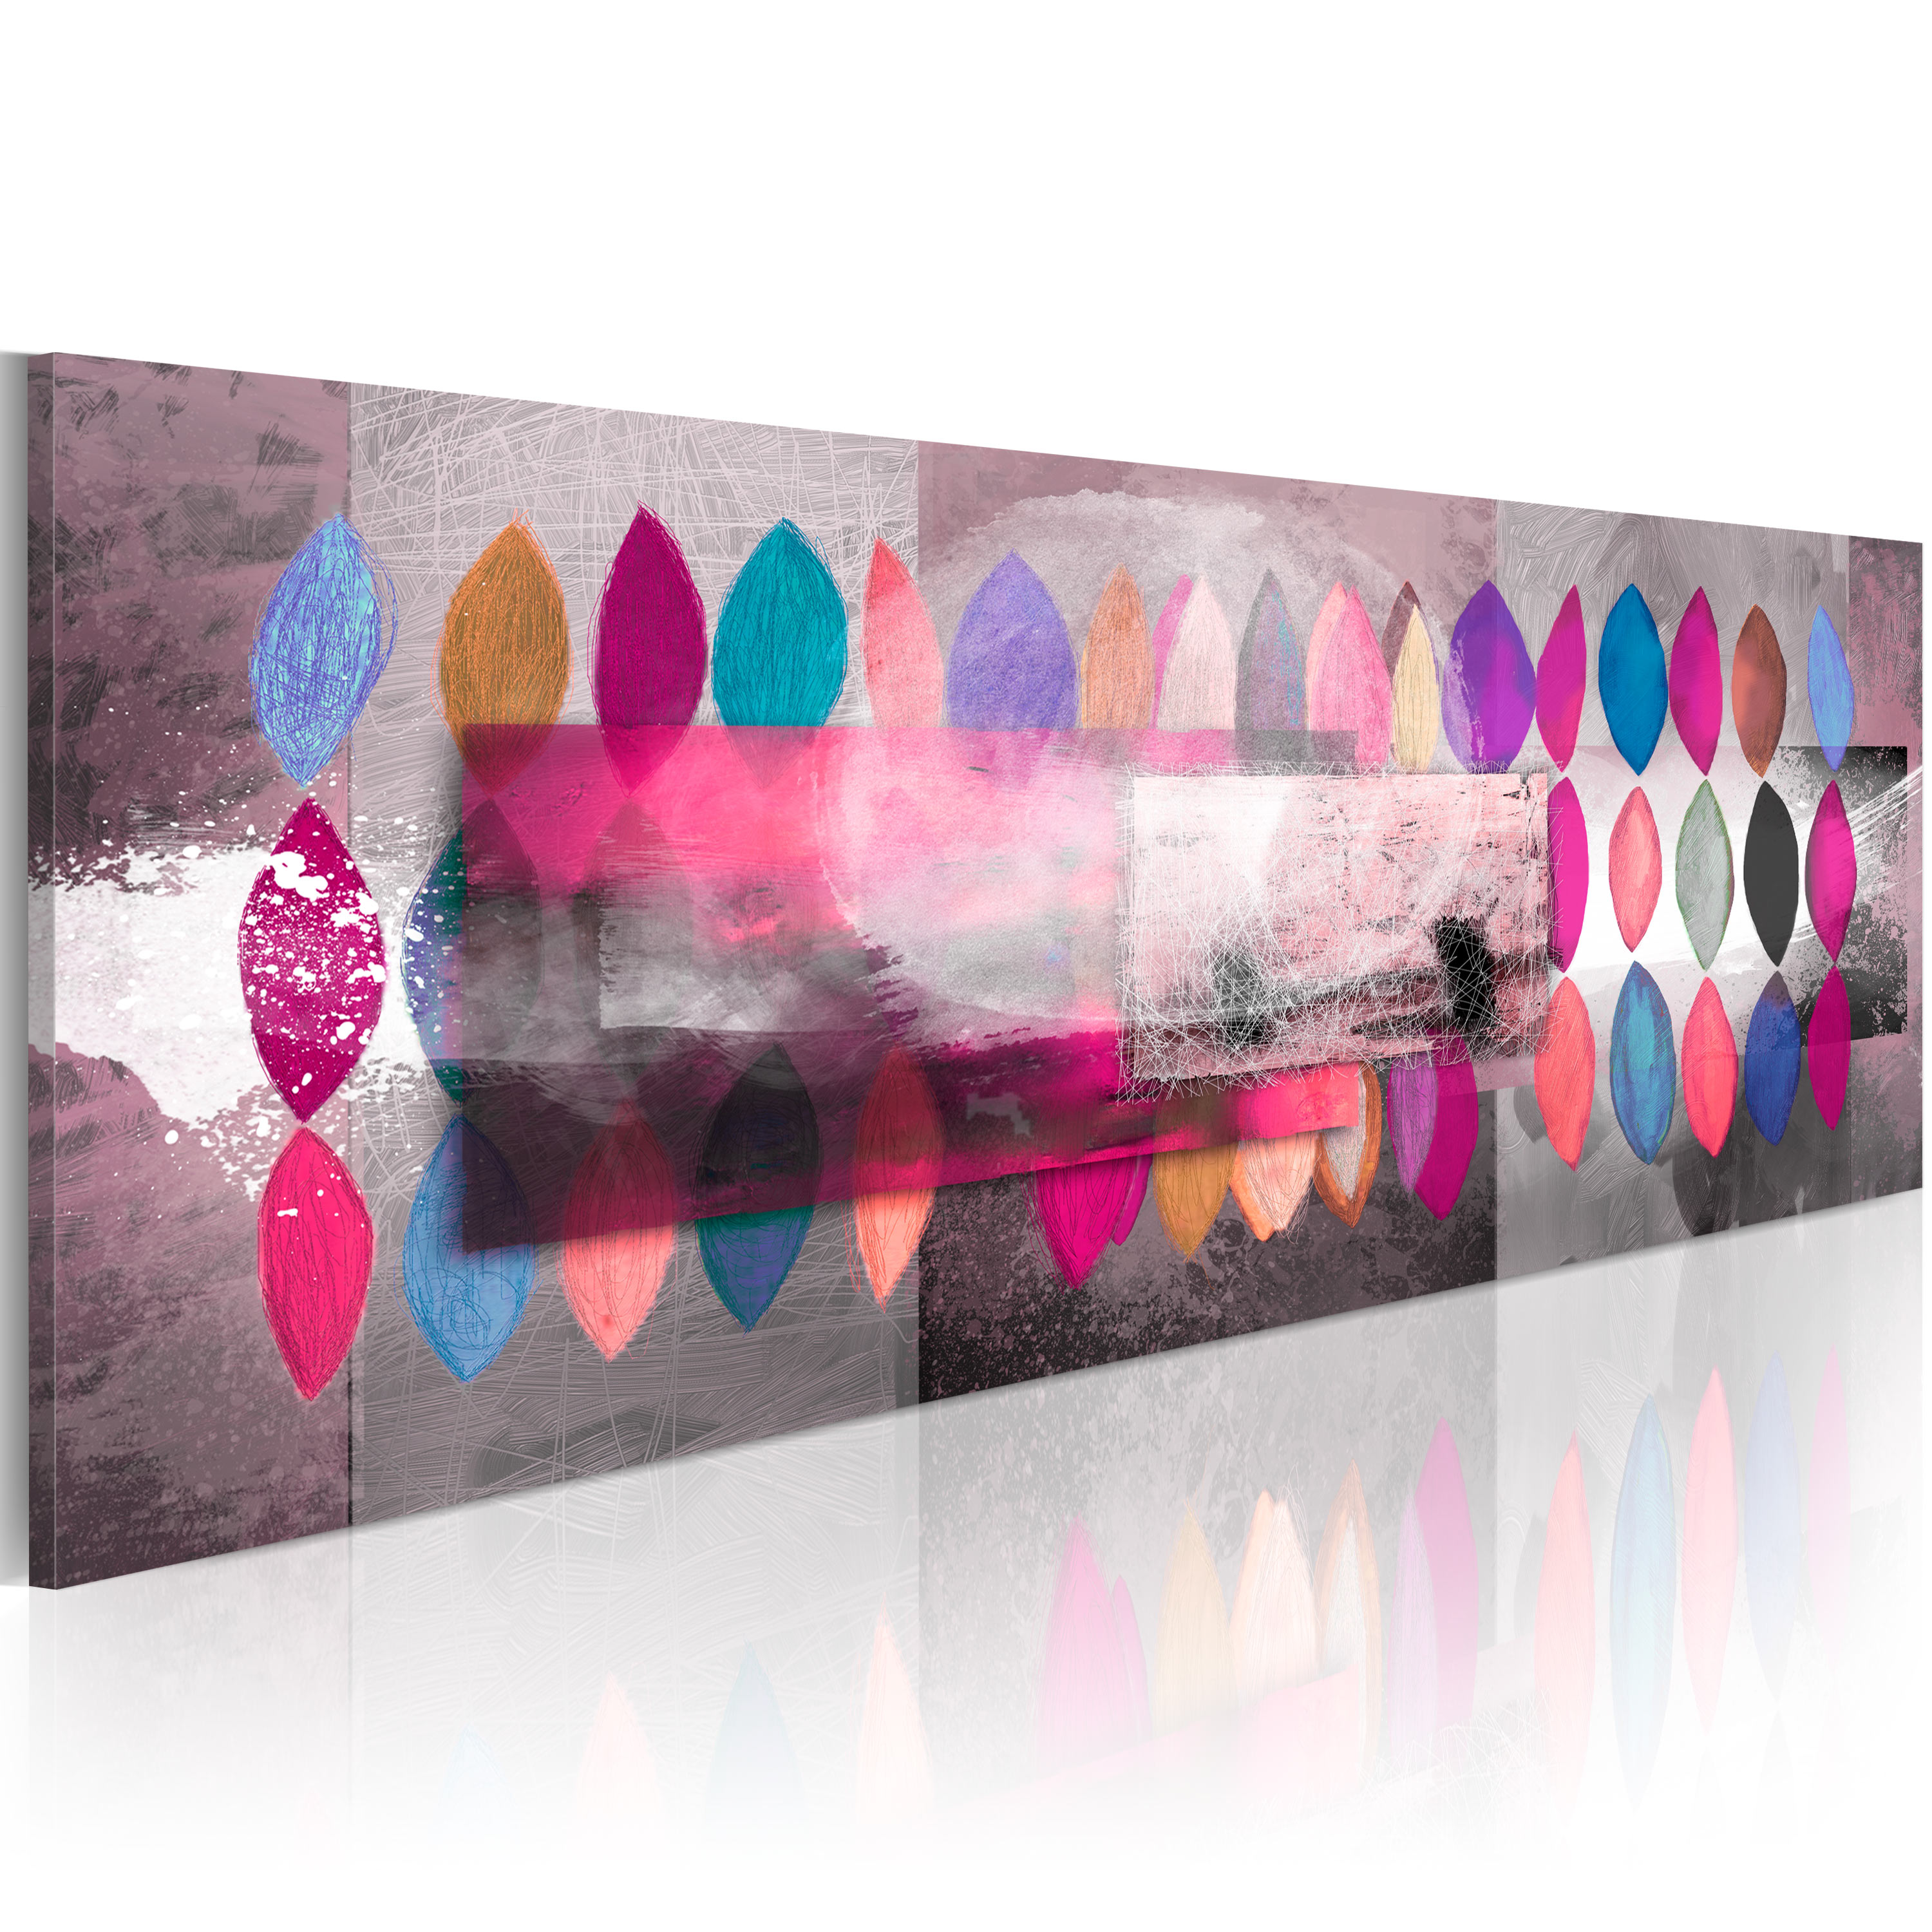 Handmade painting - Color trends - 120x40